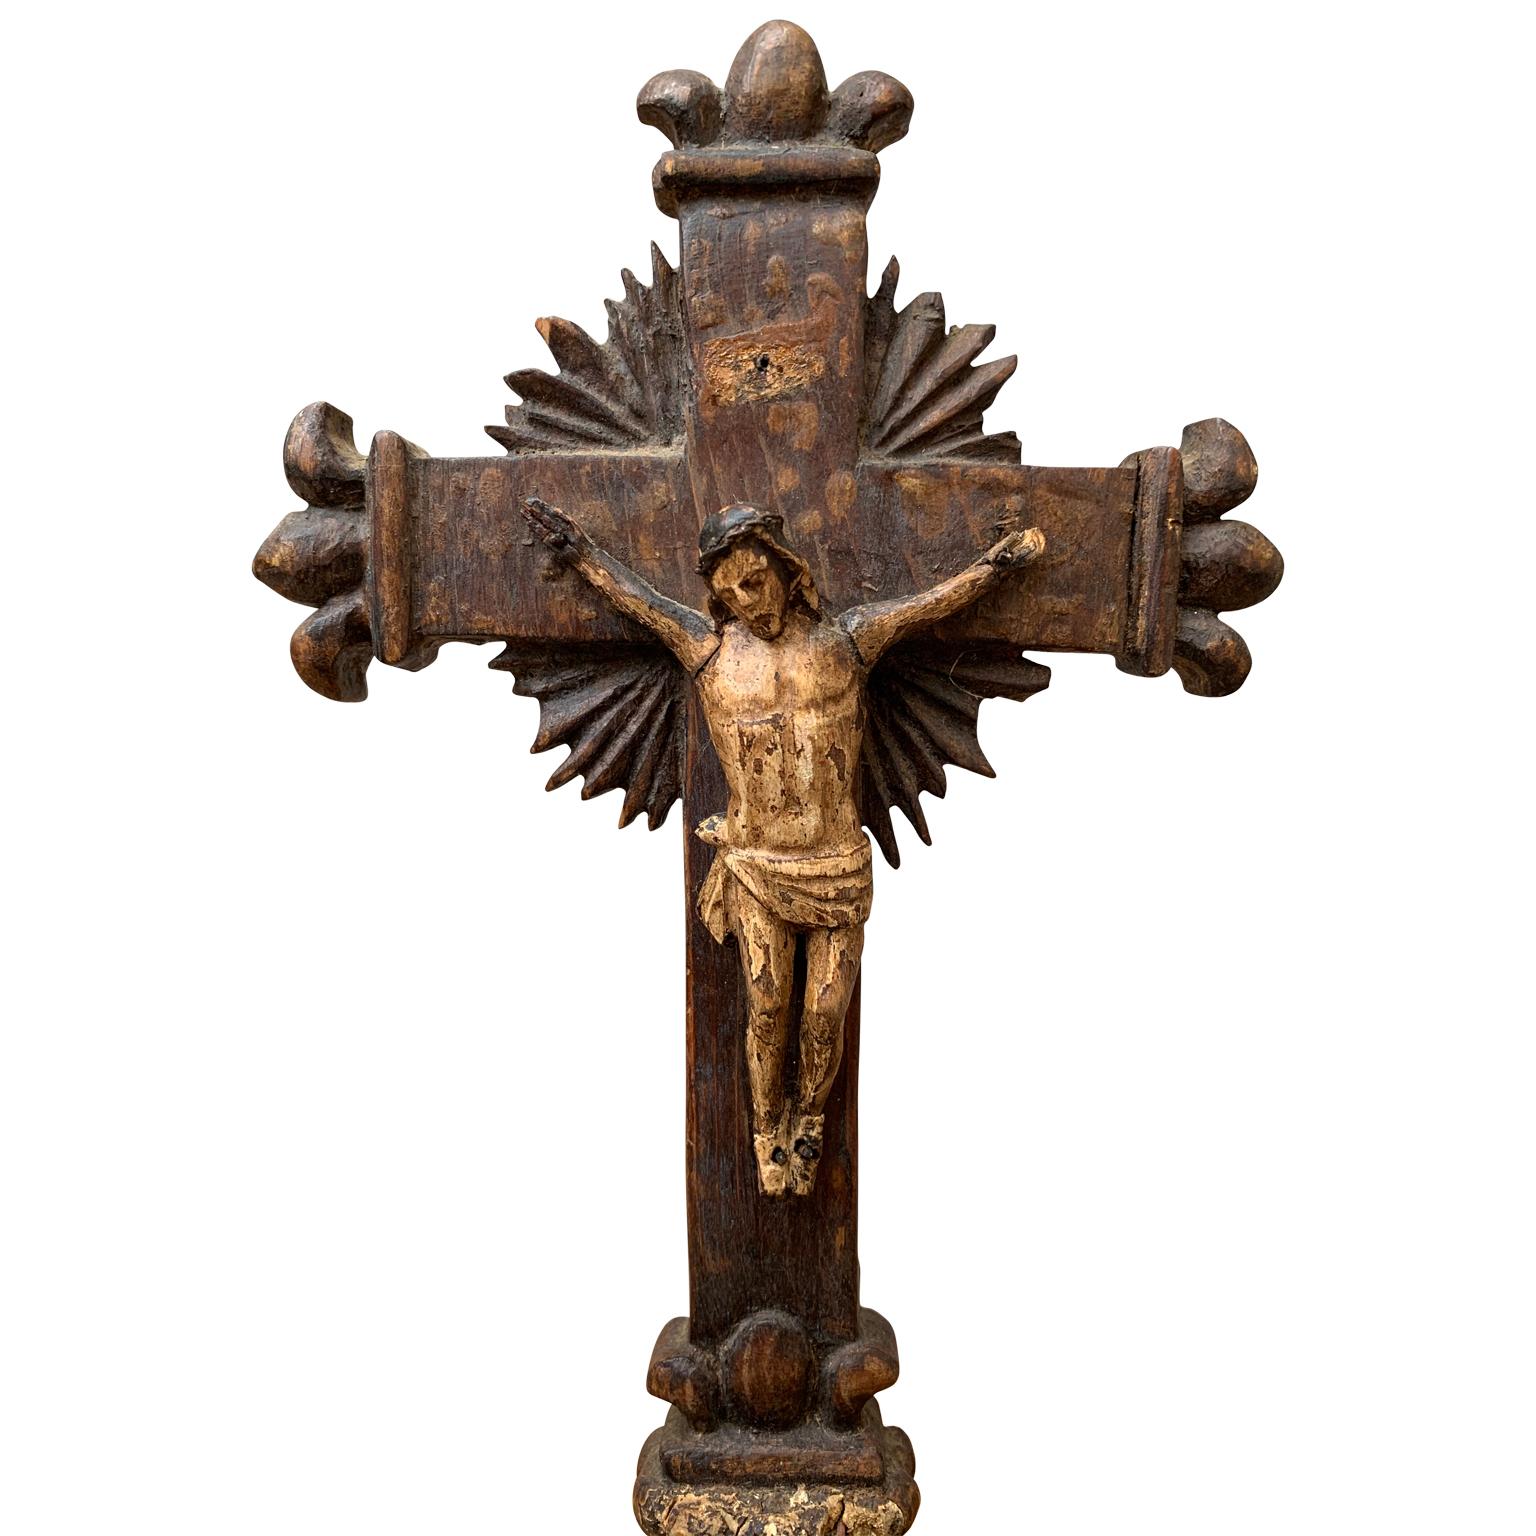 Early 18th Century antique hand carved and polychromed hand painted table crucifix from France with its original patina preserved.
The crucifix could possible mid to late 17th Century.